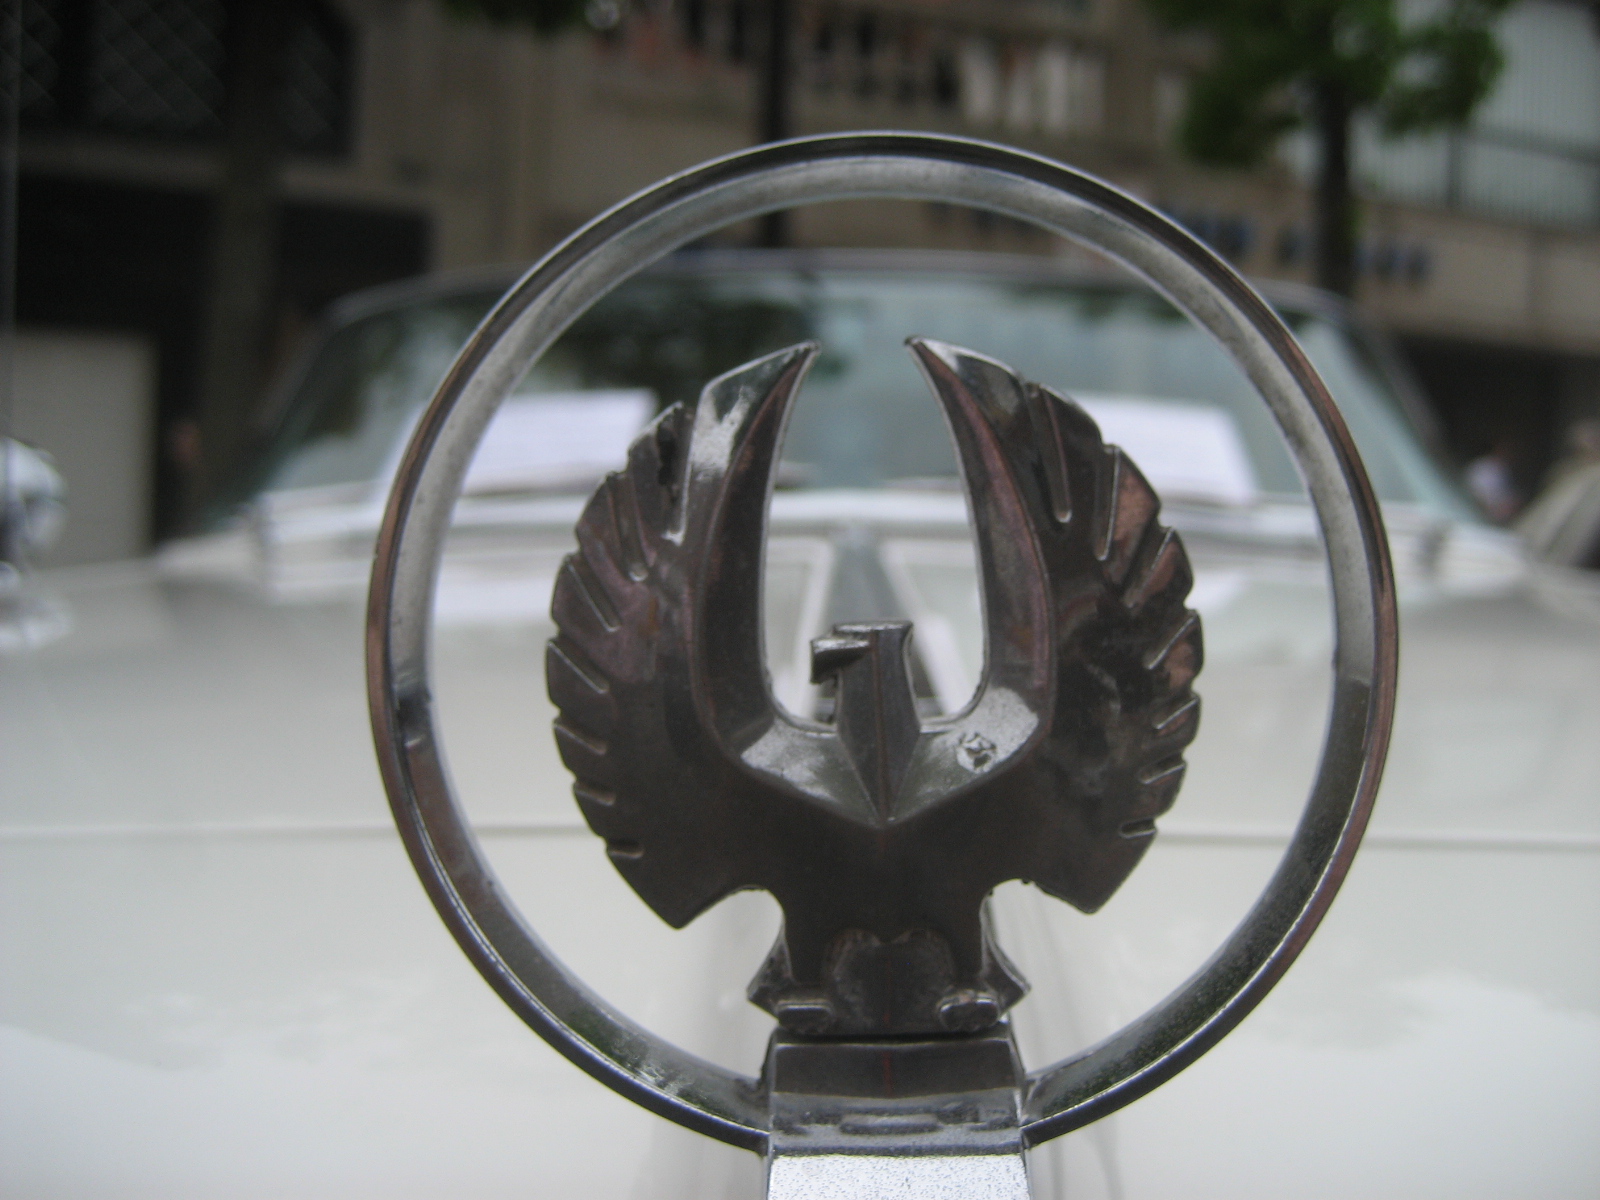 a front view mirror is seen in the center of a car